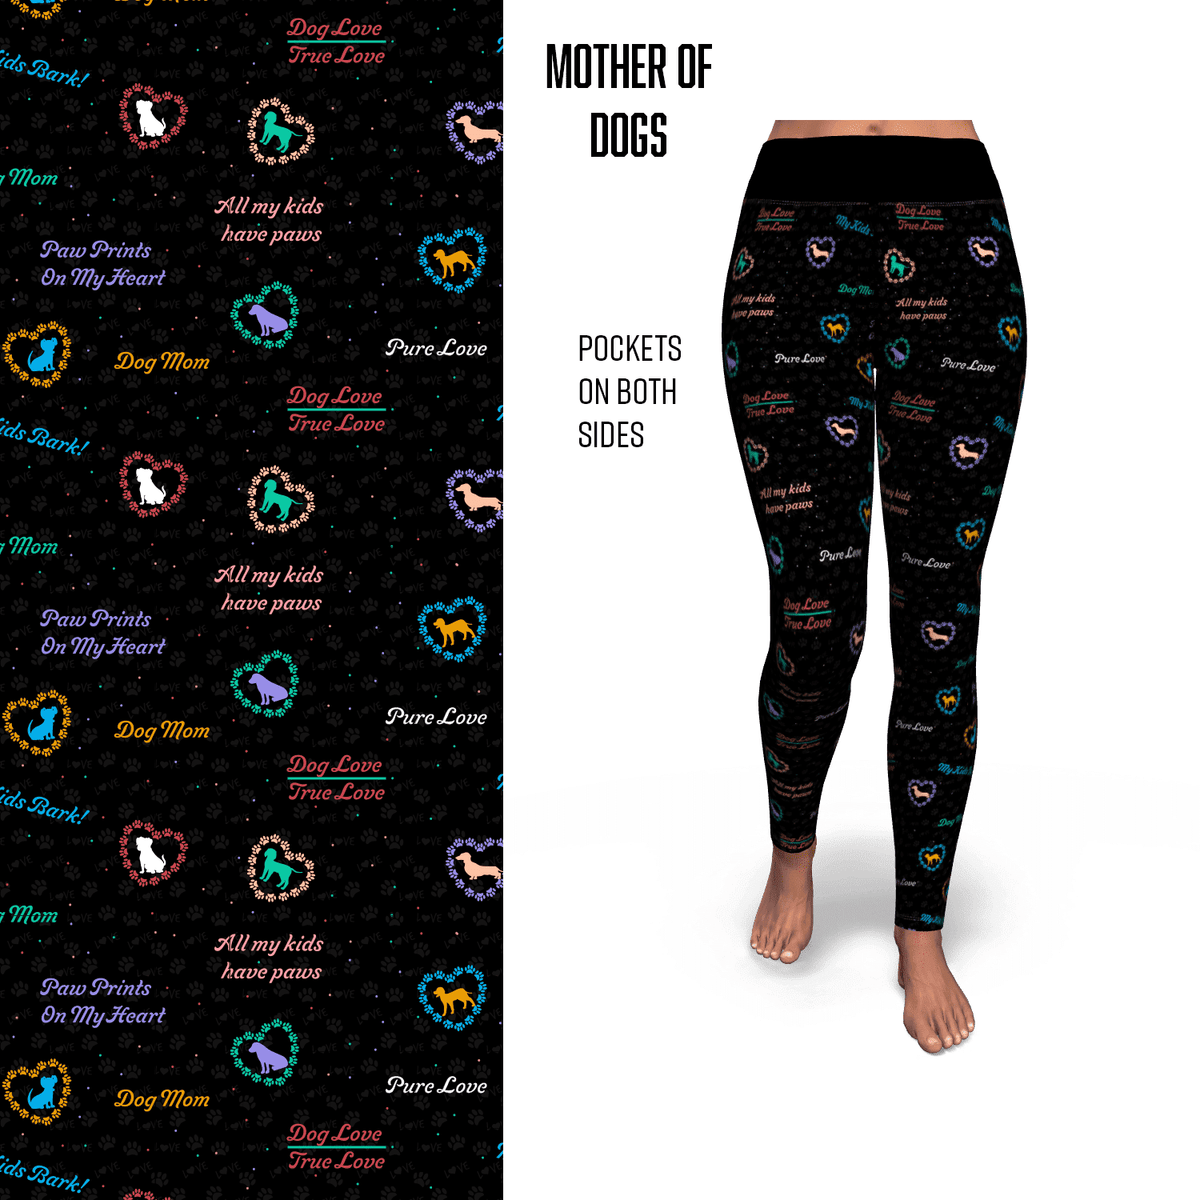 Mother of Dogs - Hearts Dog Mom Leggings and Pockets